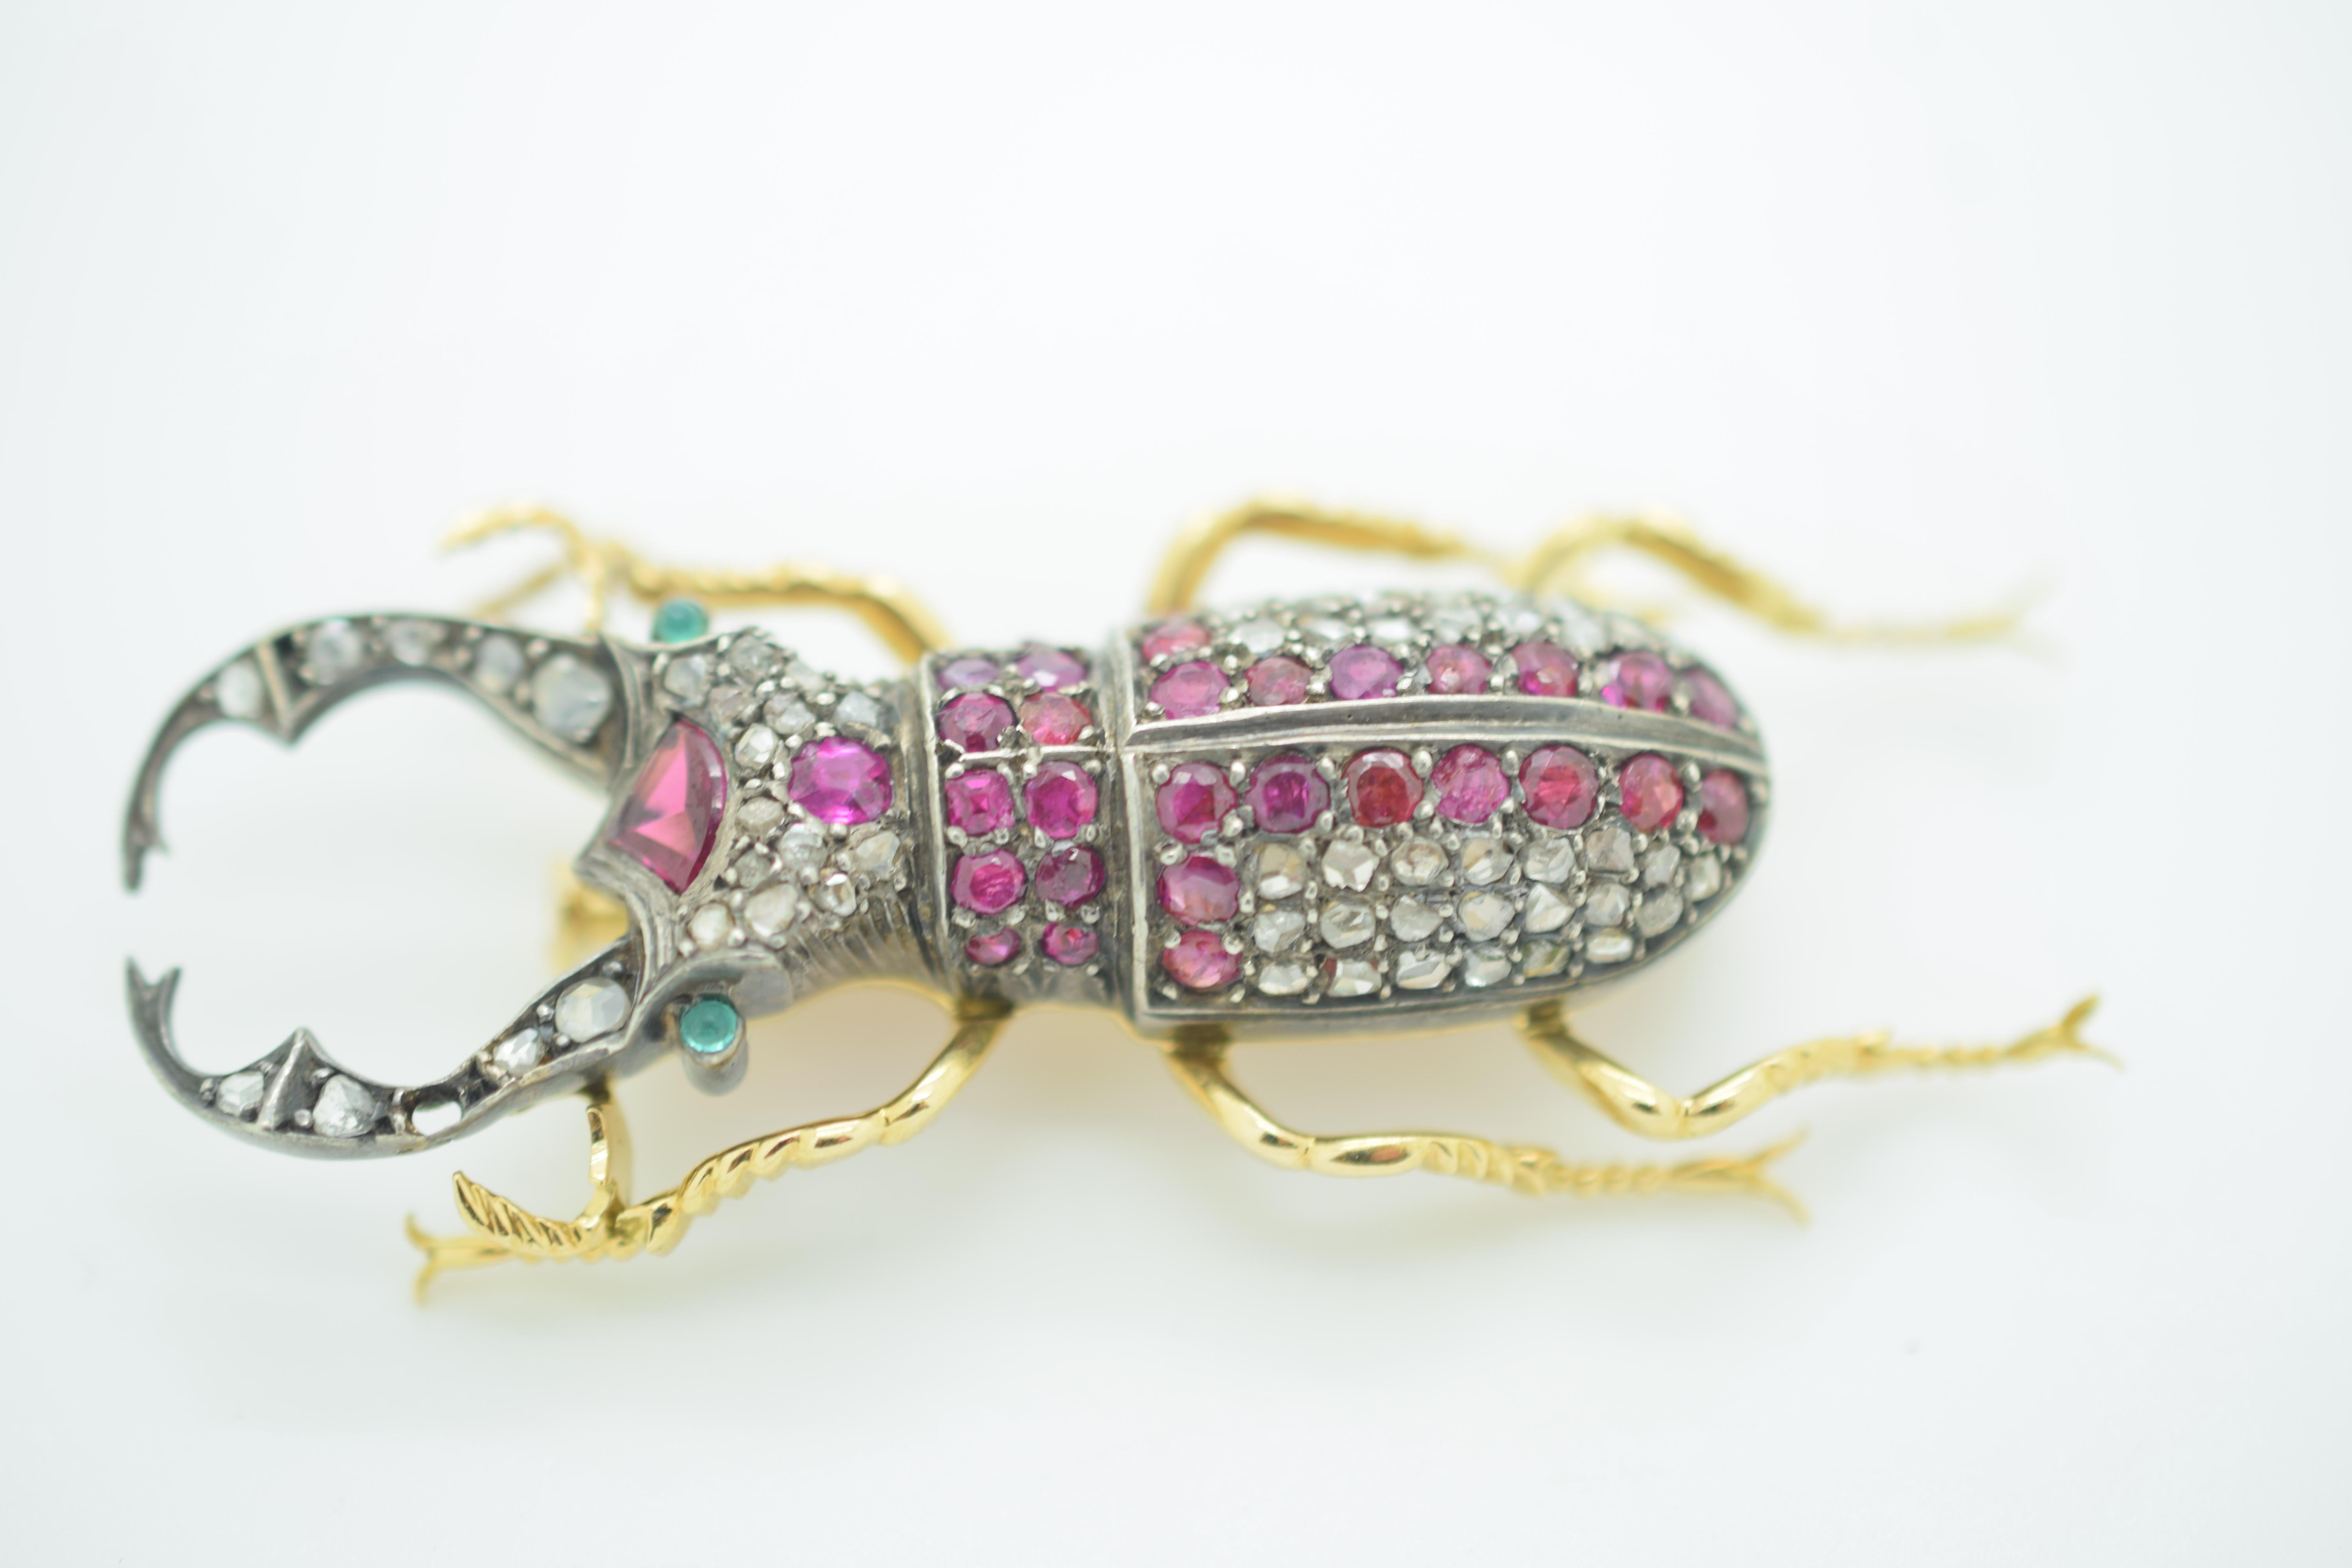 Vintage Ruby and Diamond vintage scarab brooch. This piece is truly exceptional. Details are endless as the gemstones show the true age of this piece. Crafted in 18k yellow gold this piece has detail throughout. The top portion of this brooch is